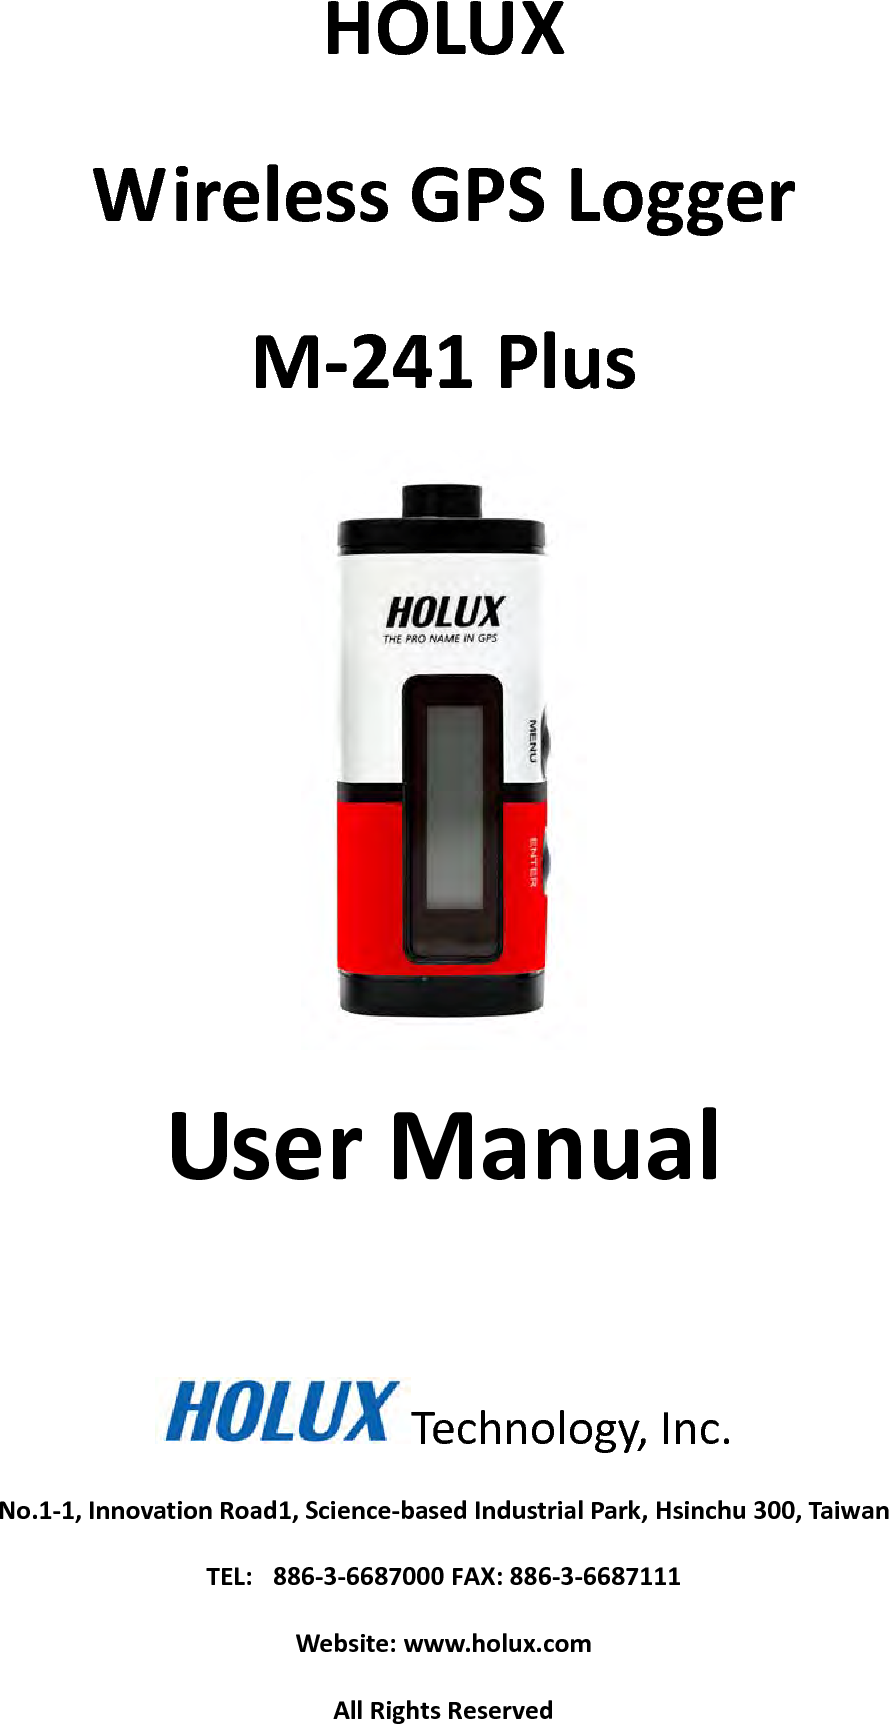  HOLUX Wireless GPS Logger M-241 Plus  User Manual   Technology, Inc. No.1-1, Innovation Road1, Science-based Industrial Park, Hsinchu 300, Taiwan TEL: 886-3-6687000 FAX: 886-3-6687111 Website: www.holux.com All Rights Reserved  